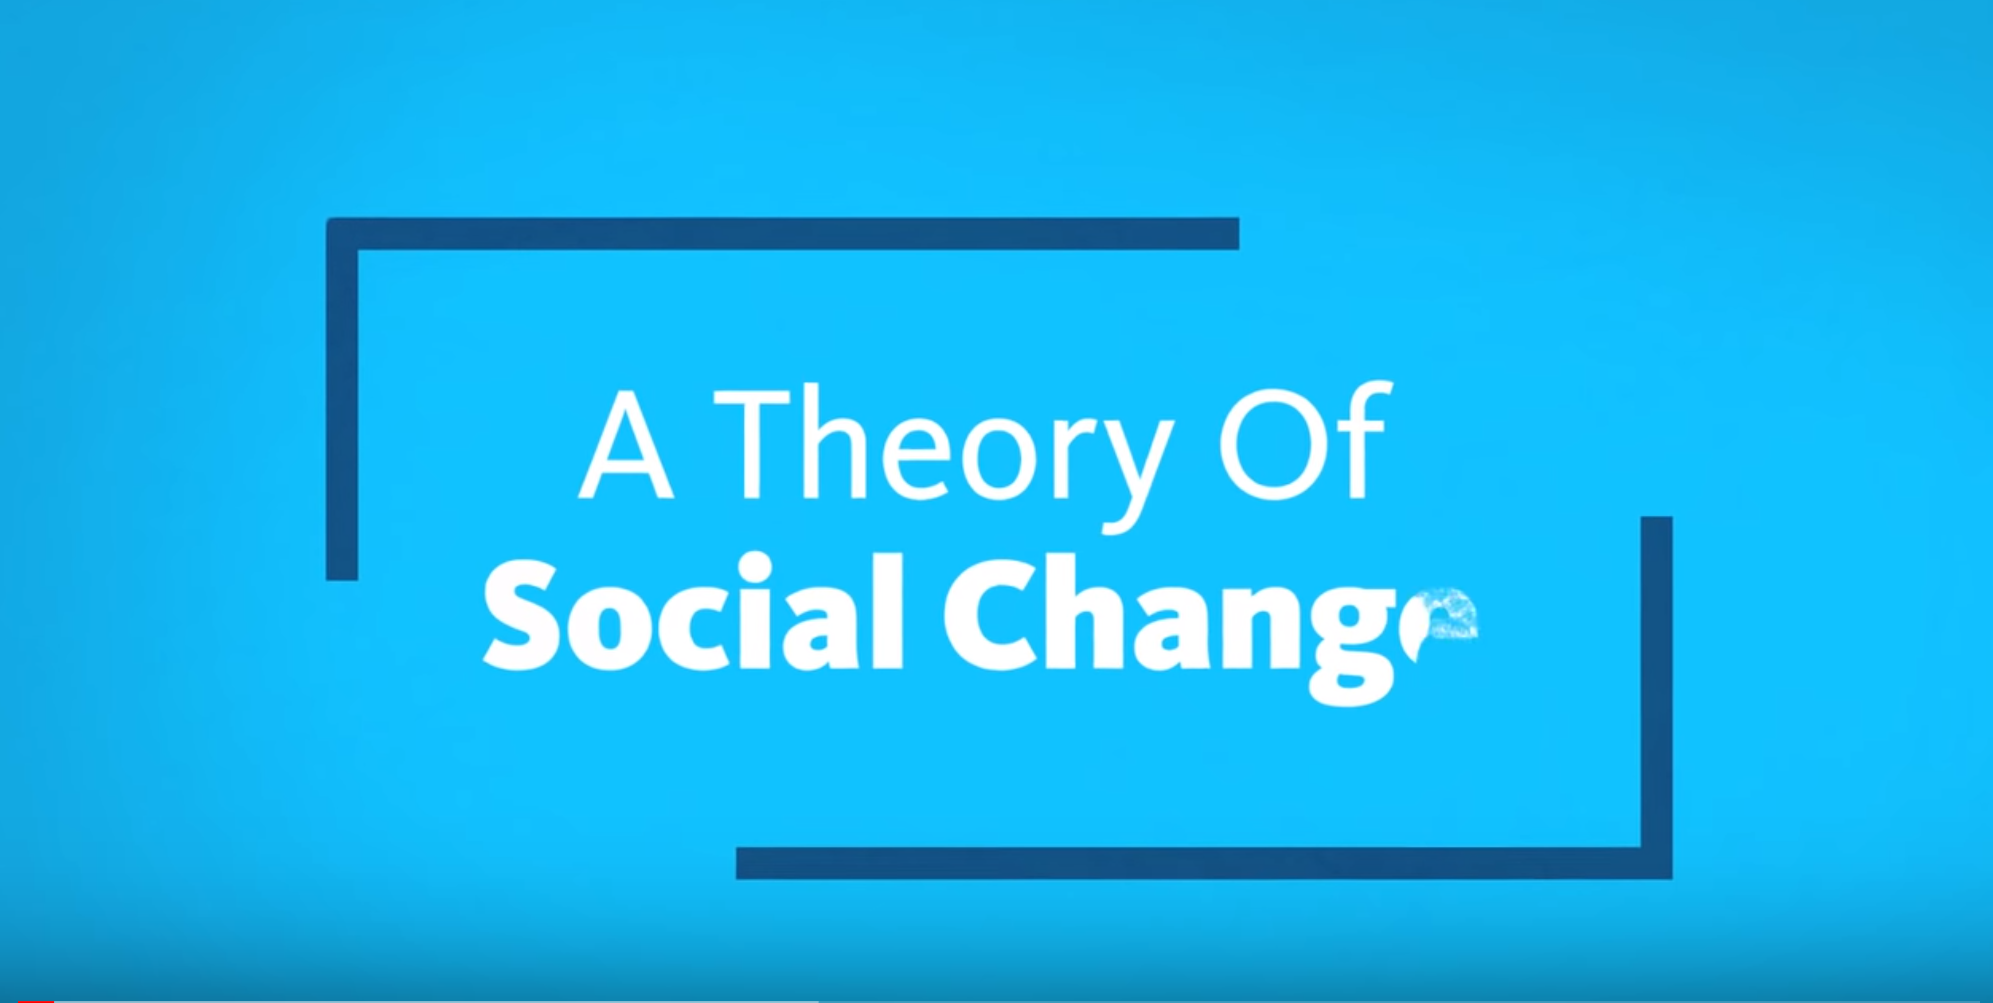 A Theory of Social Change